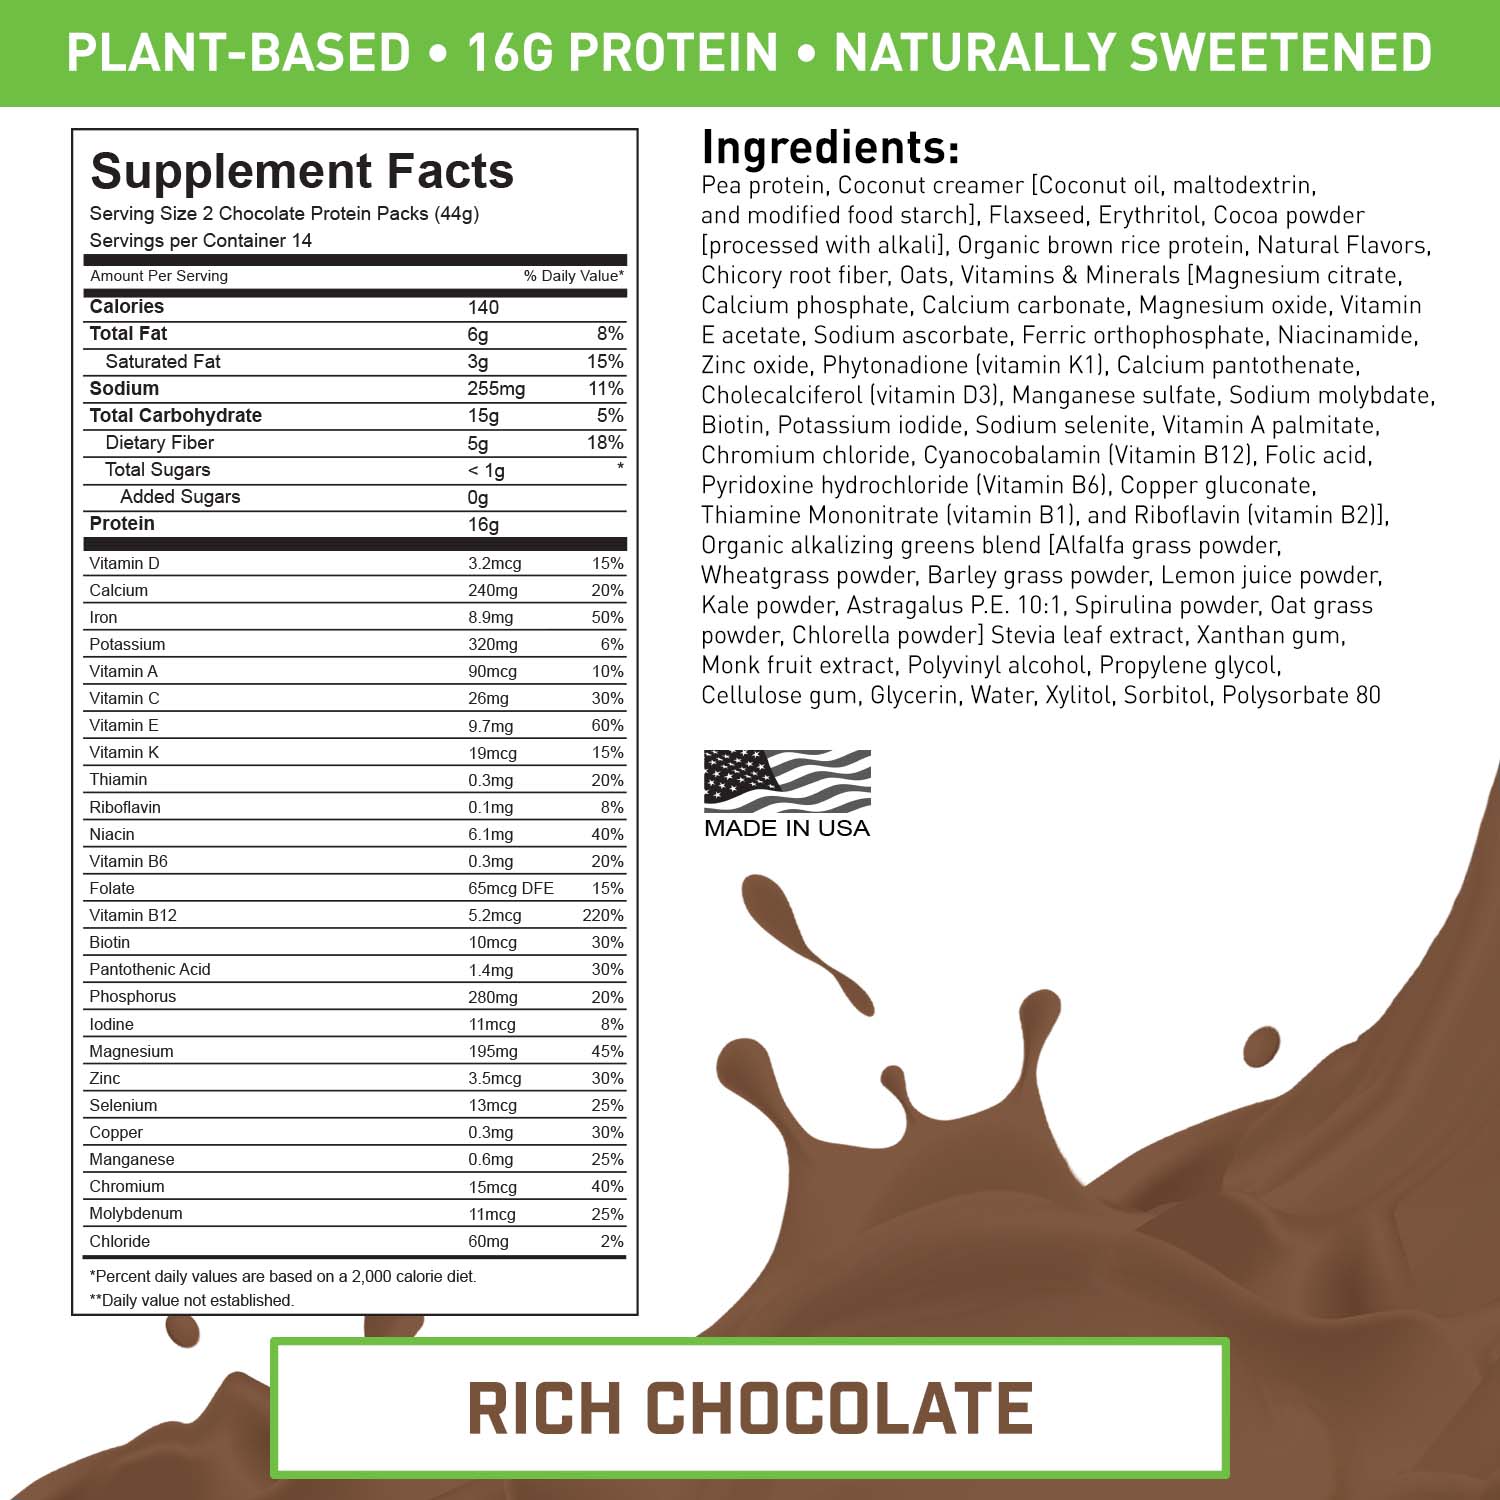 PLANT-BASED MEAL REPLACEMENT RICH CHOCOLATE – VADE Nutrition